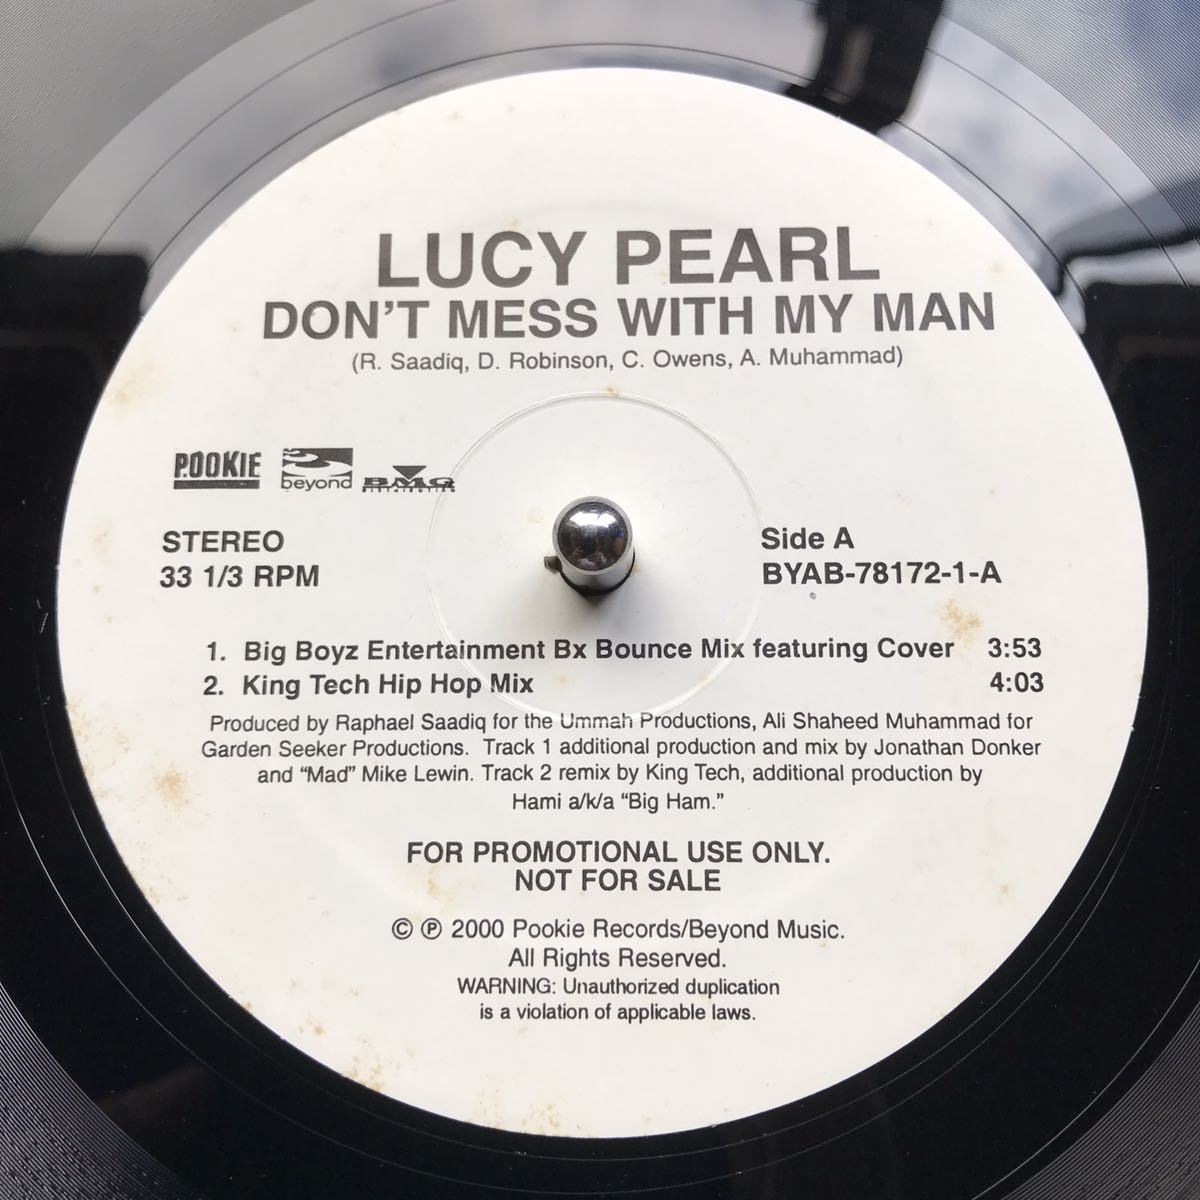 Don't Mess With My Man - LUCY PEARL US Promo Only Remix収録 12インチレコード R&B/Hip Hop